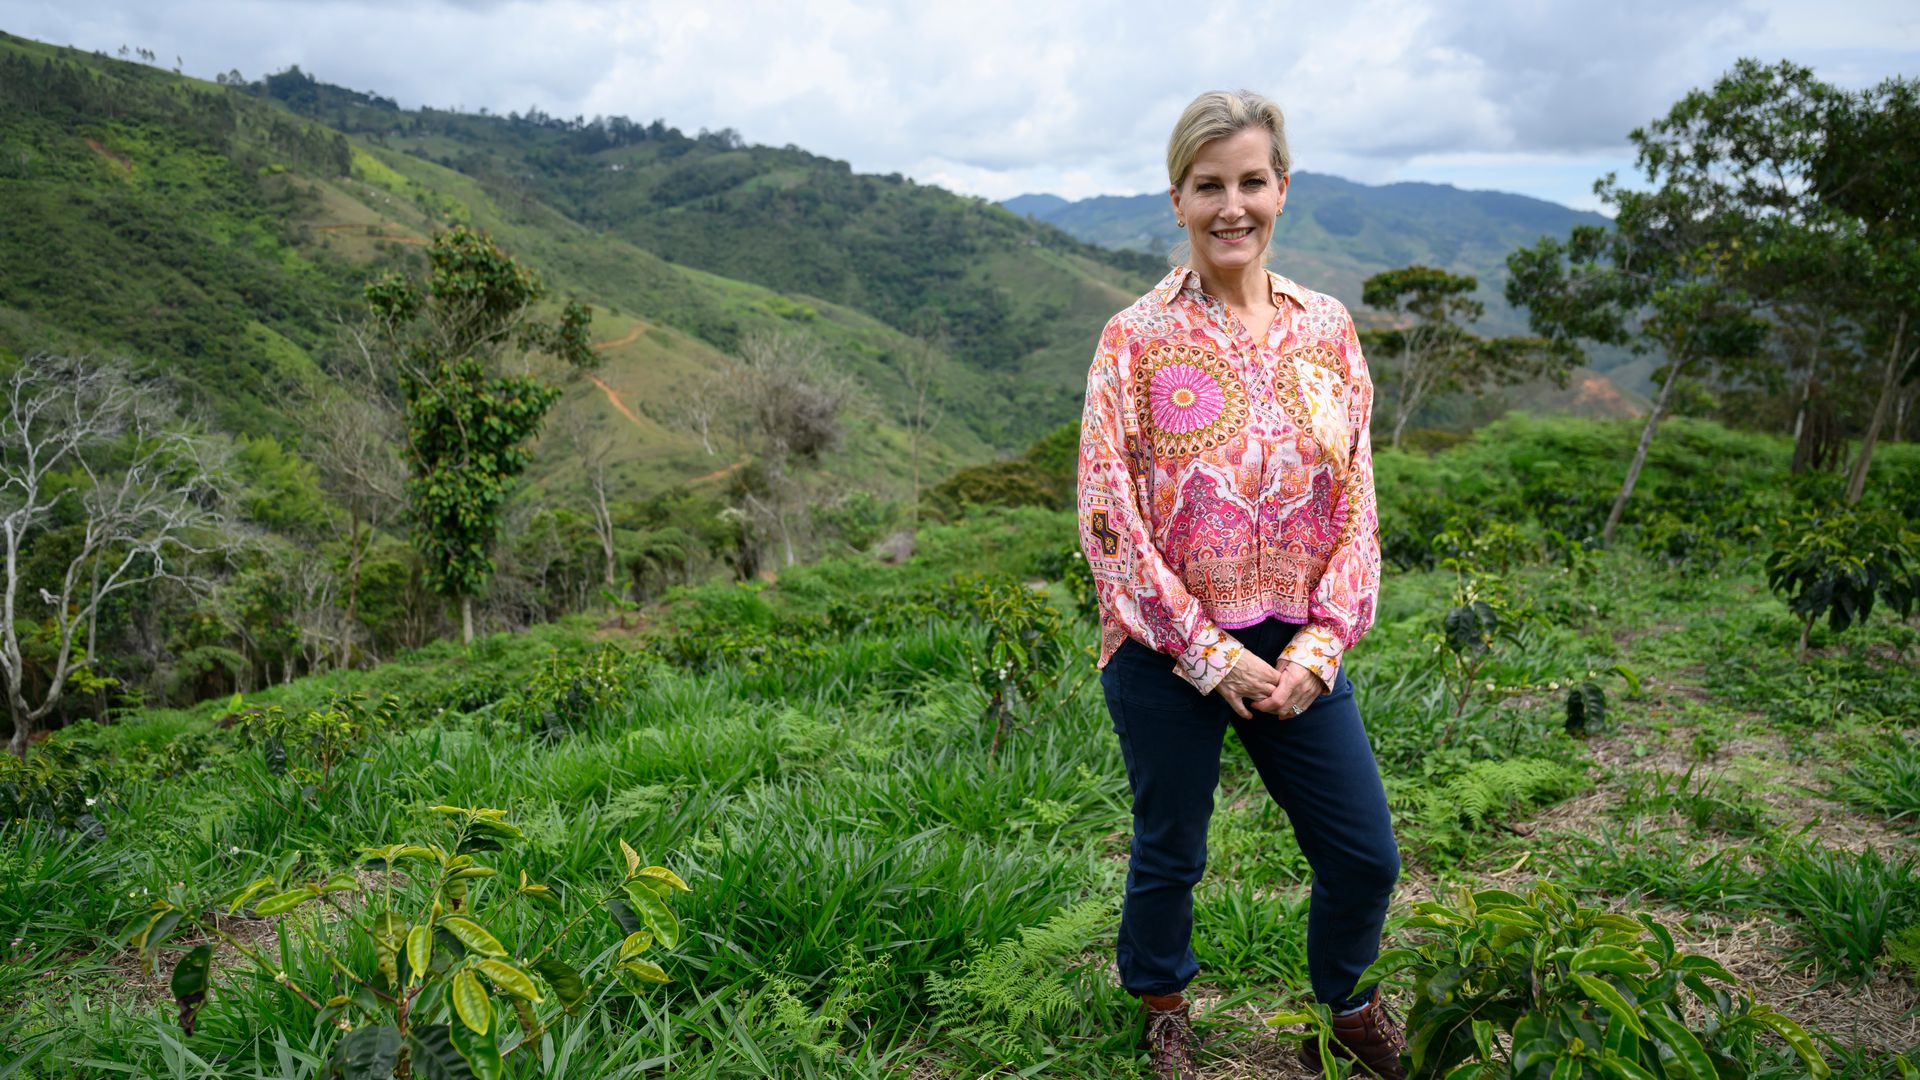 The Duchess of Edinburgh shines a light on issue close to her heart in Colombia